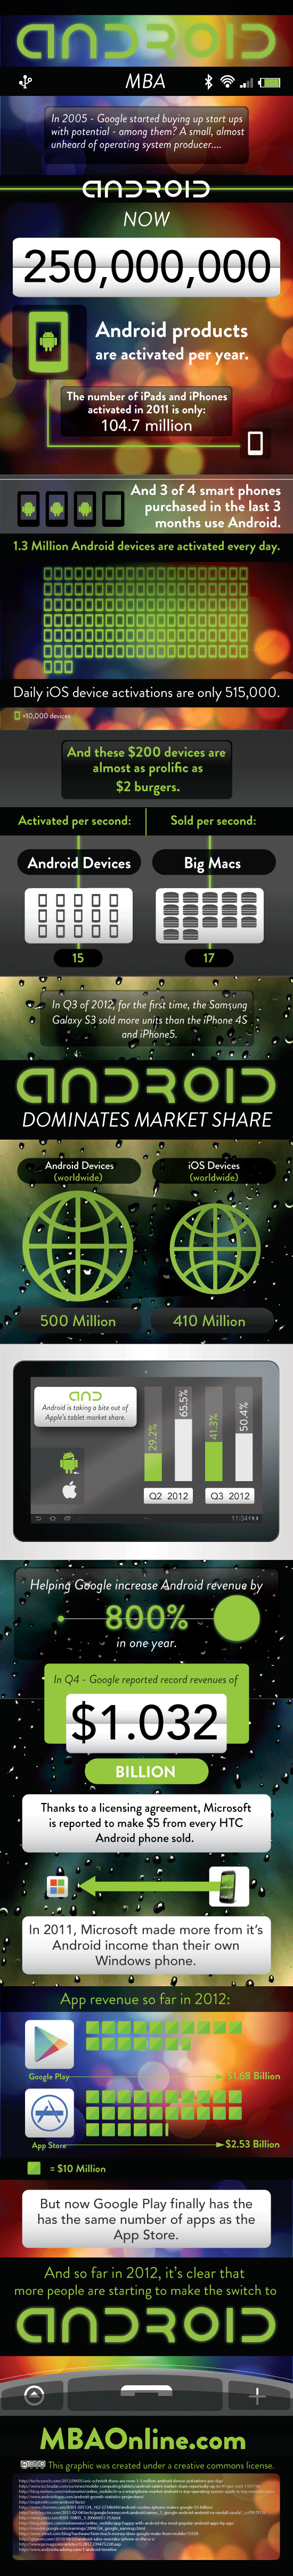 The rise of android in 2012